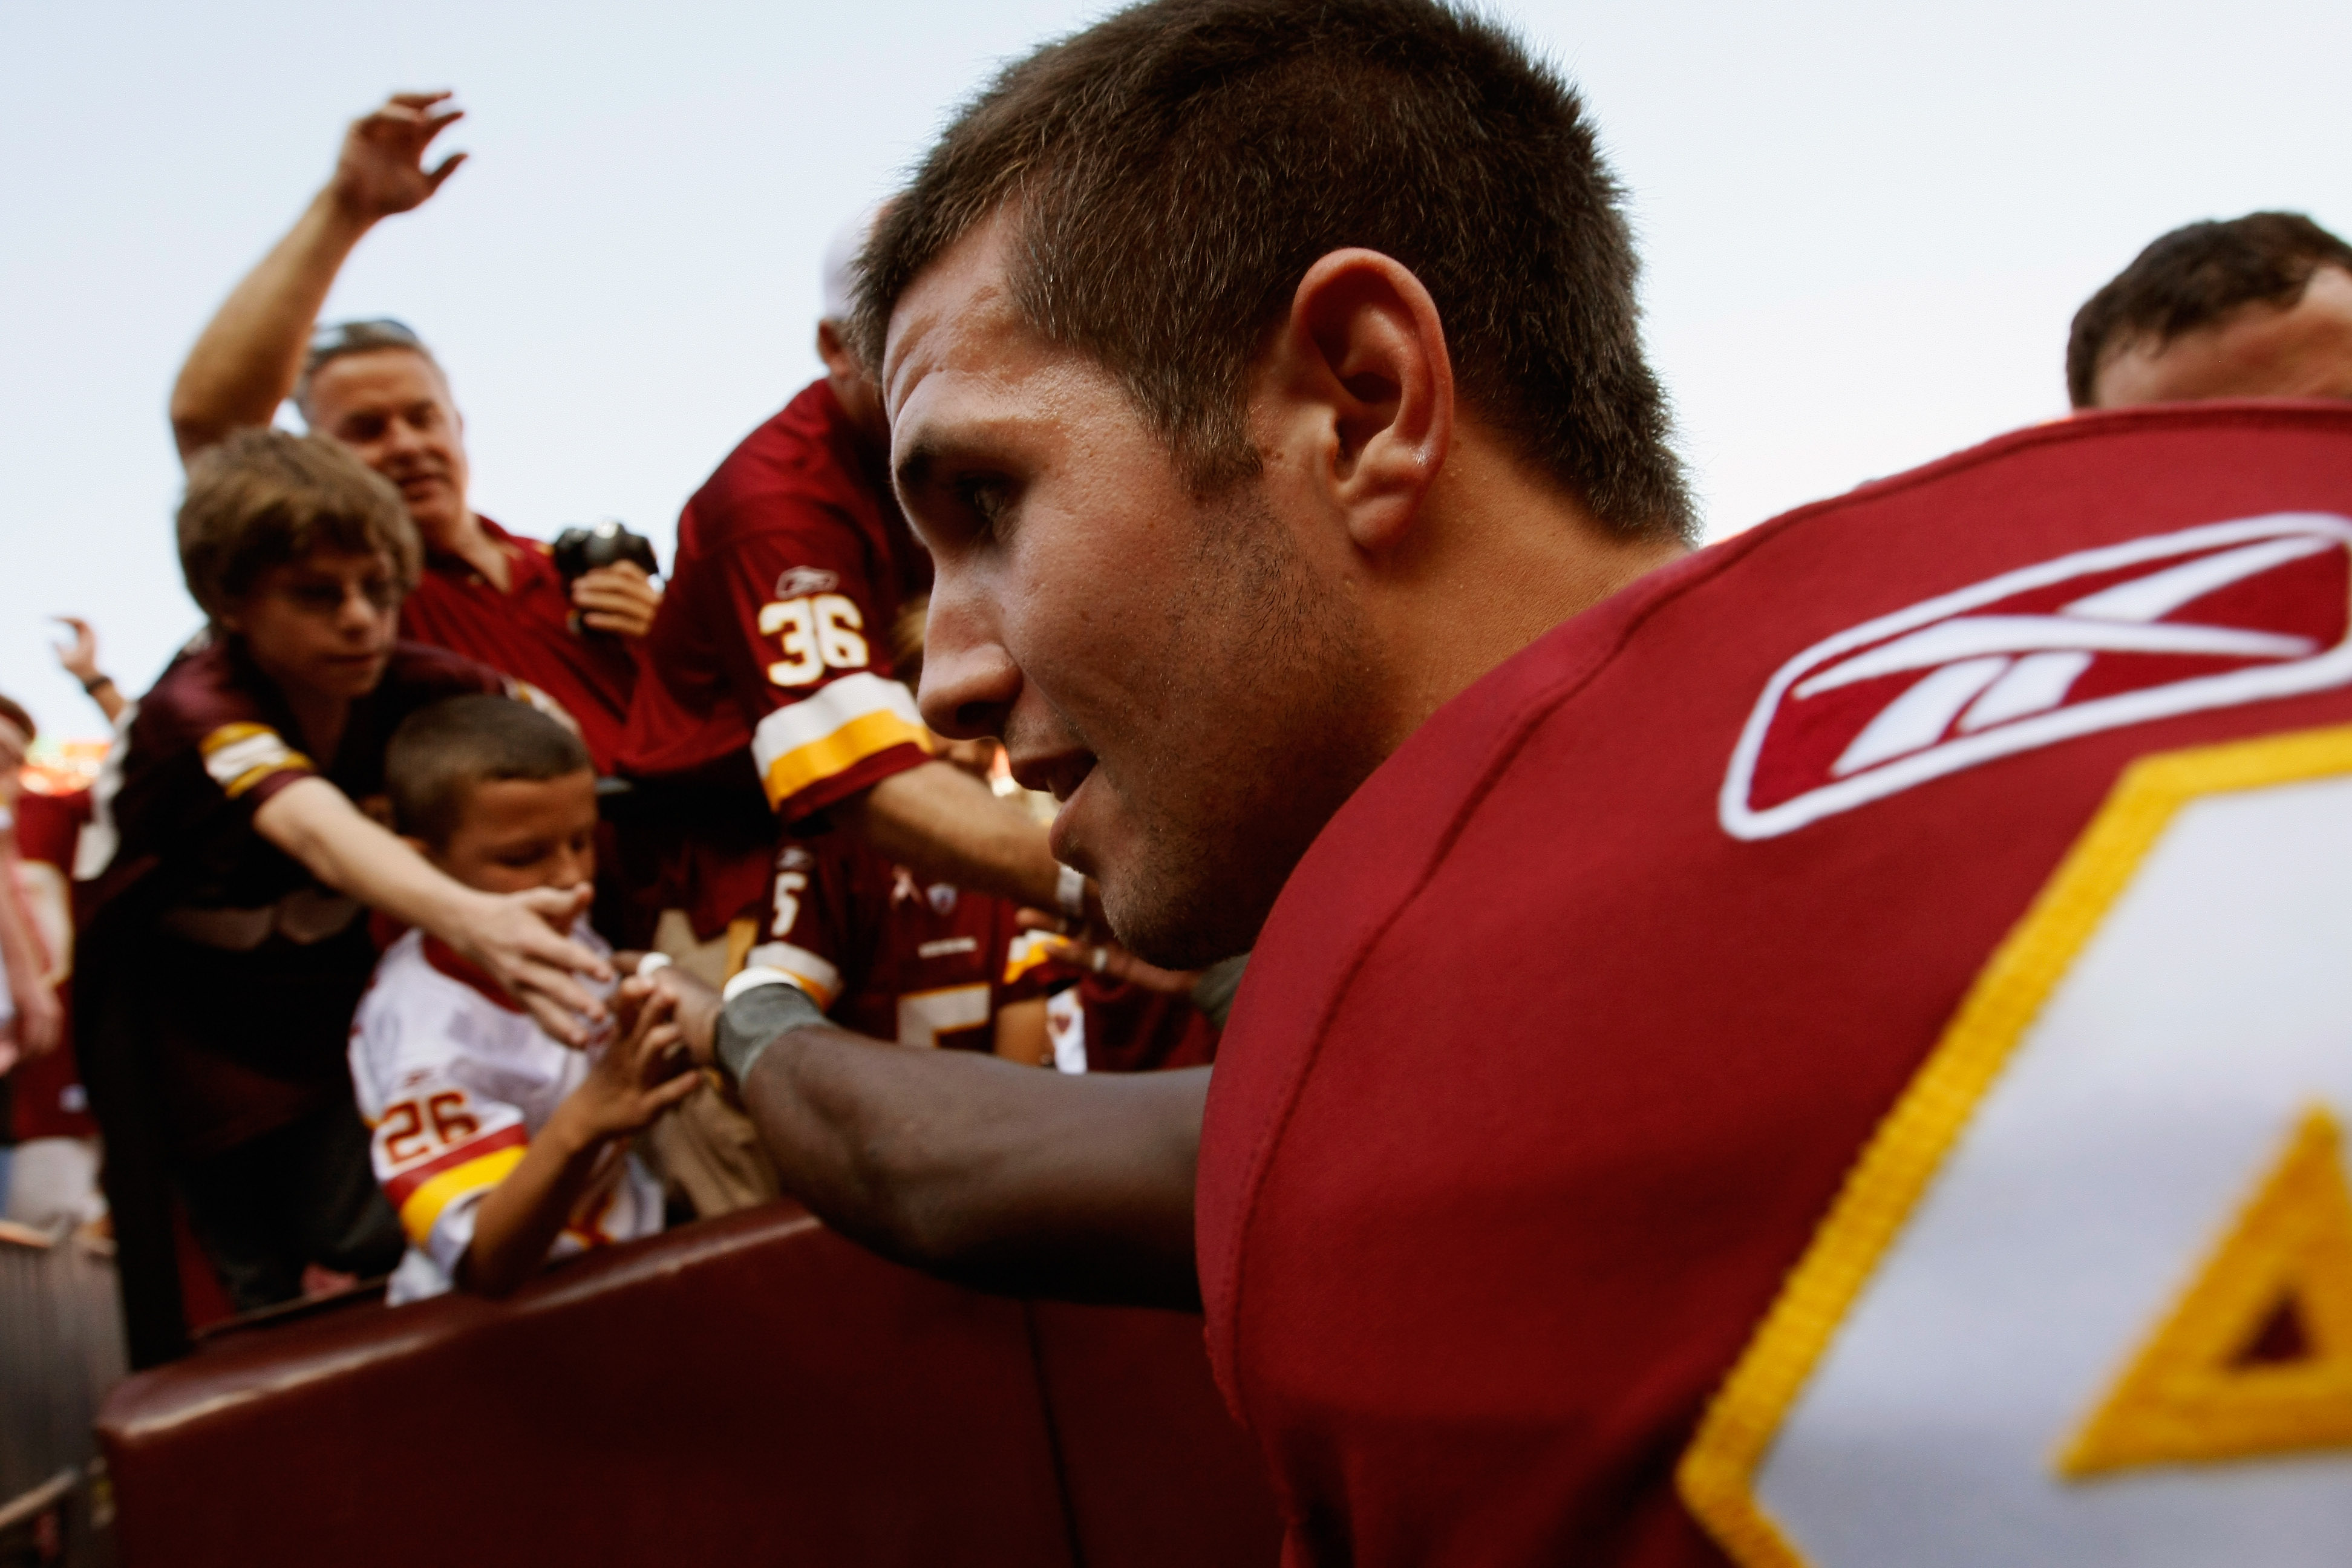 LANDOVER, MD - OCTOBER 10:  Kicker Graham Gano #4 of the Washington Redskins is greeted by fans after kicking the game winning field goal in overtime against the Green Bay Packers at FedExField on October 10, 2010 in Landover, Maryland. The Redskins won t